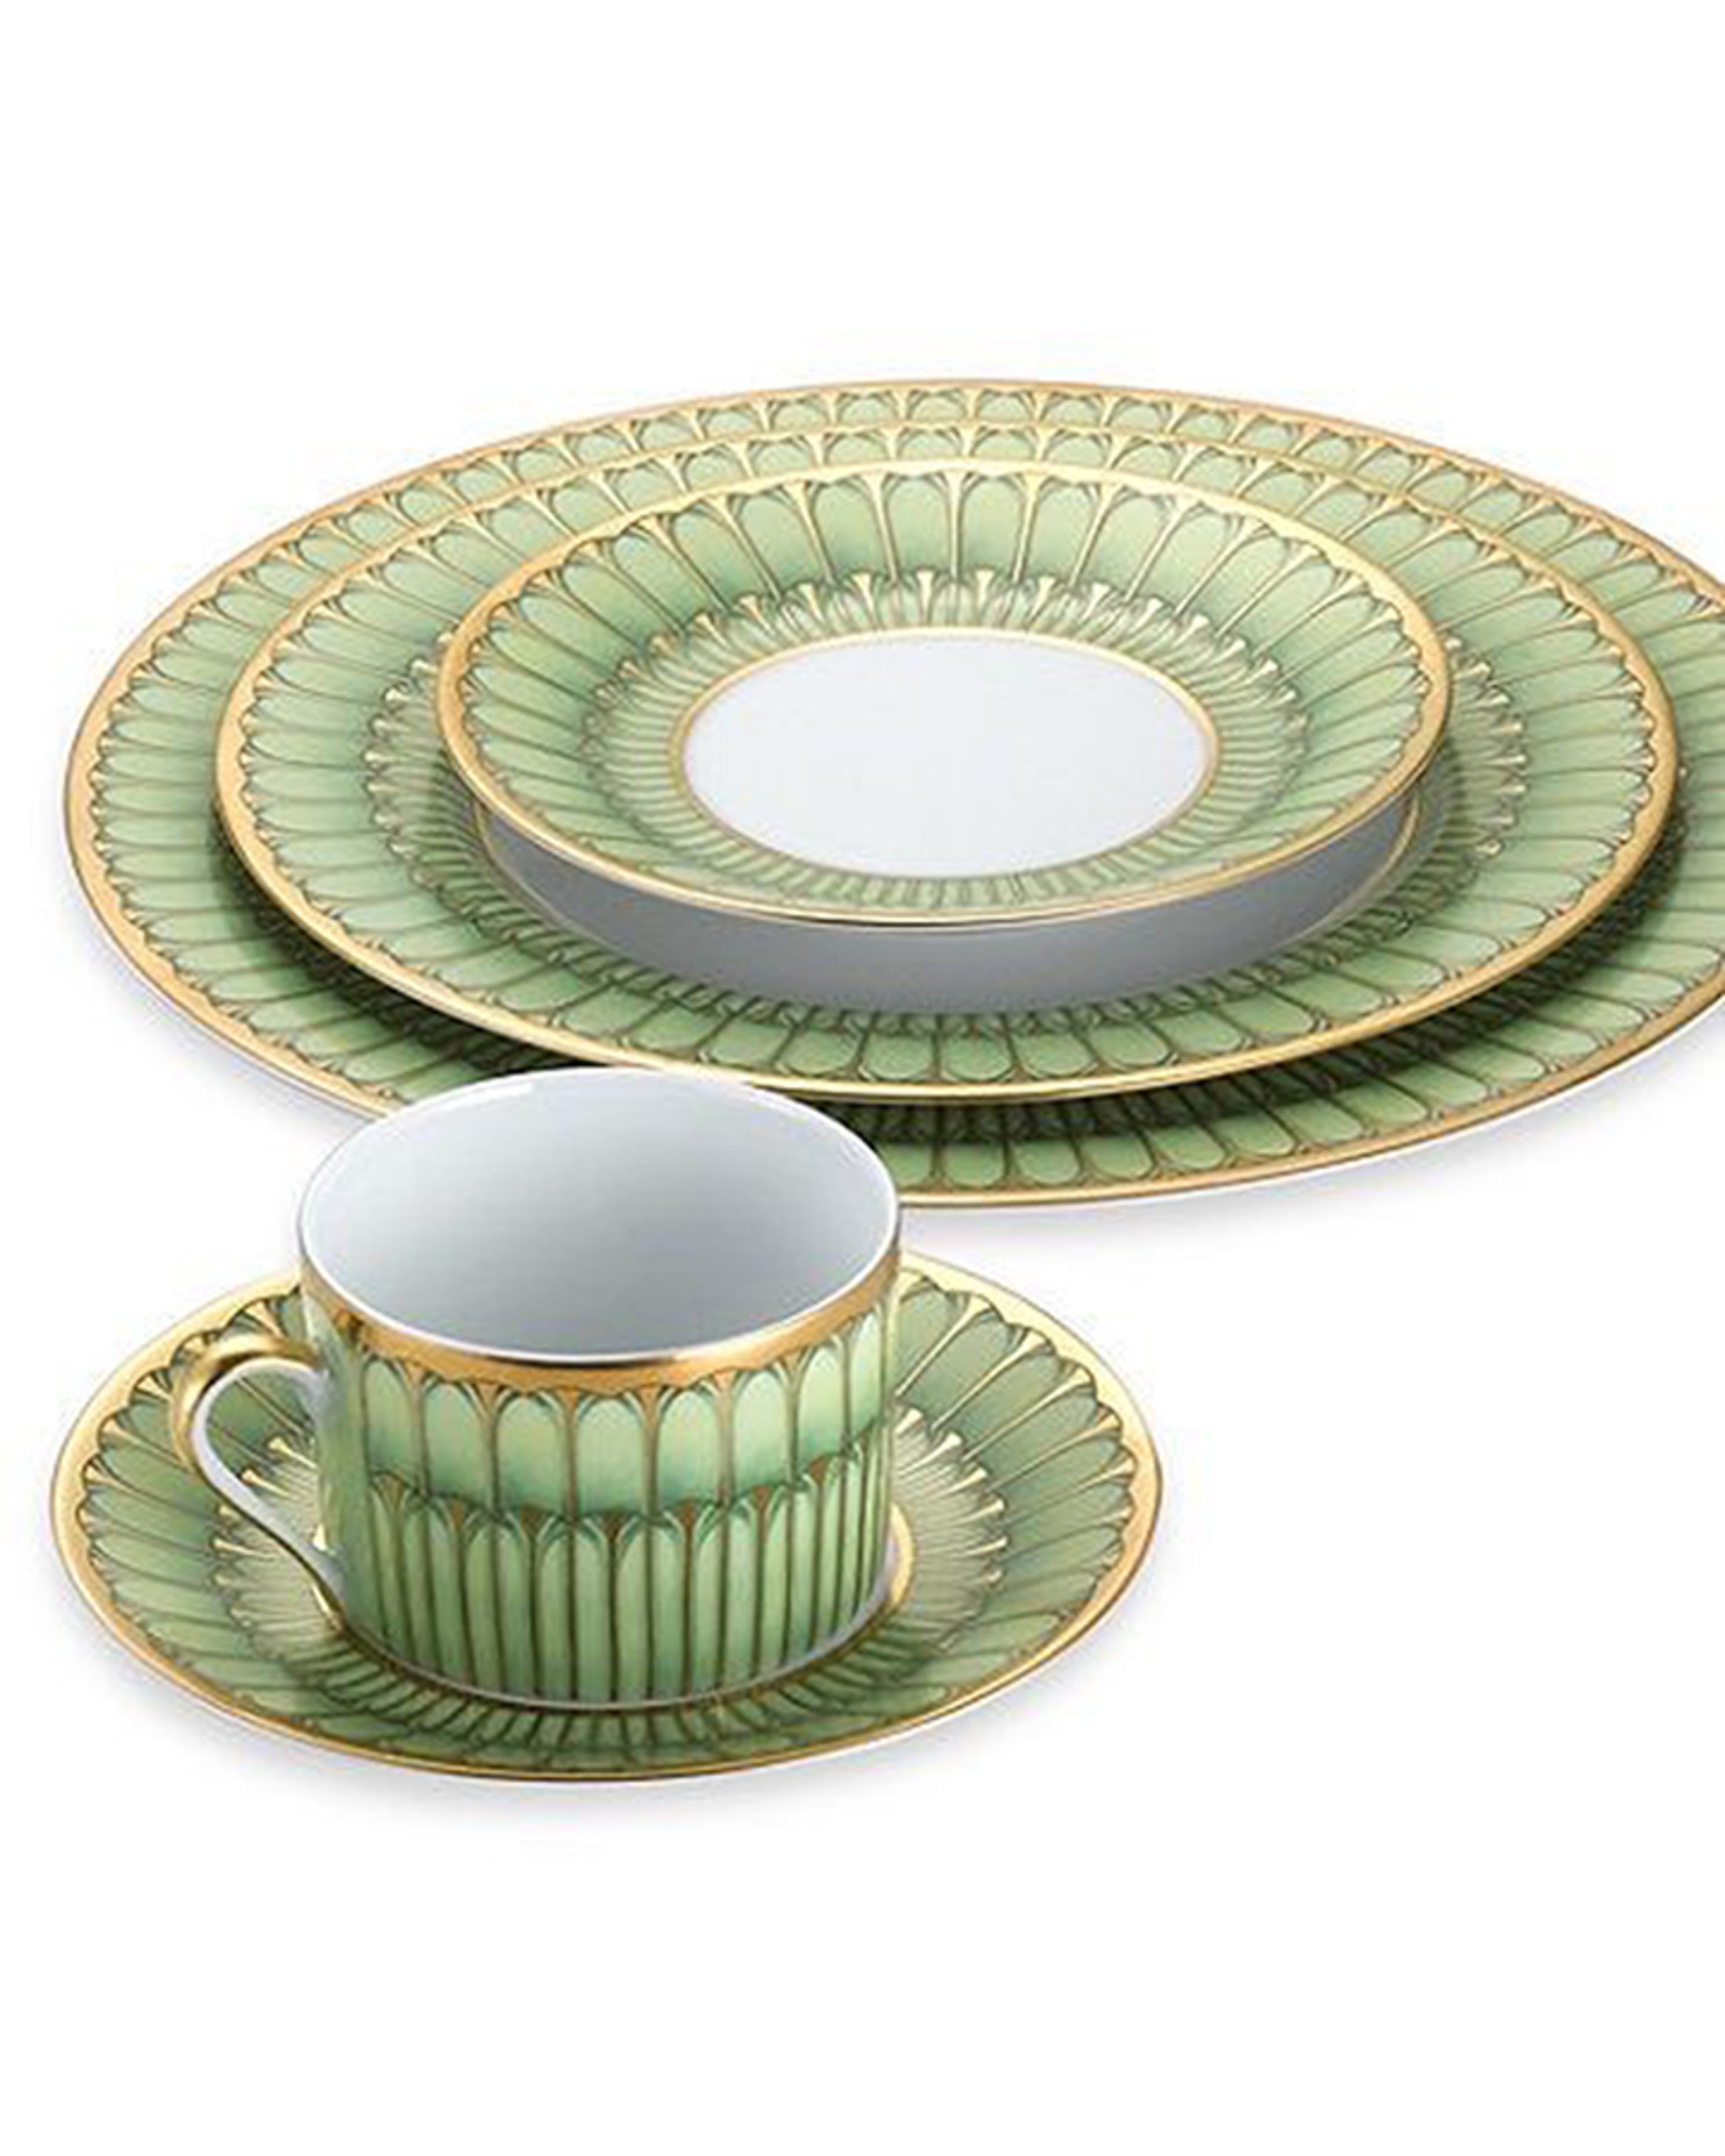 Dinner Plates With Tea Sets Online Shopping